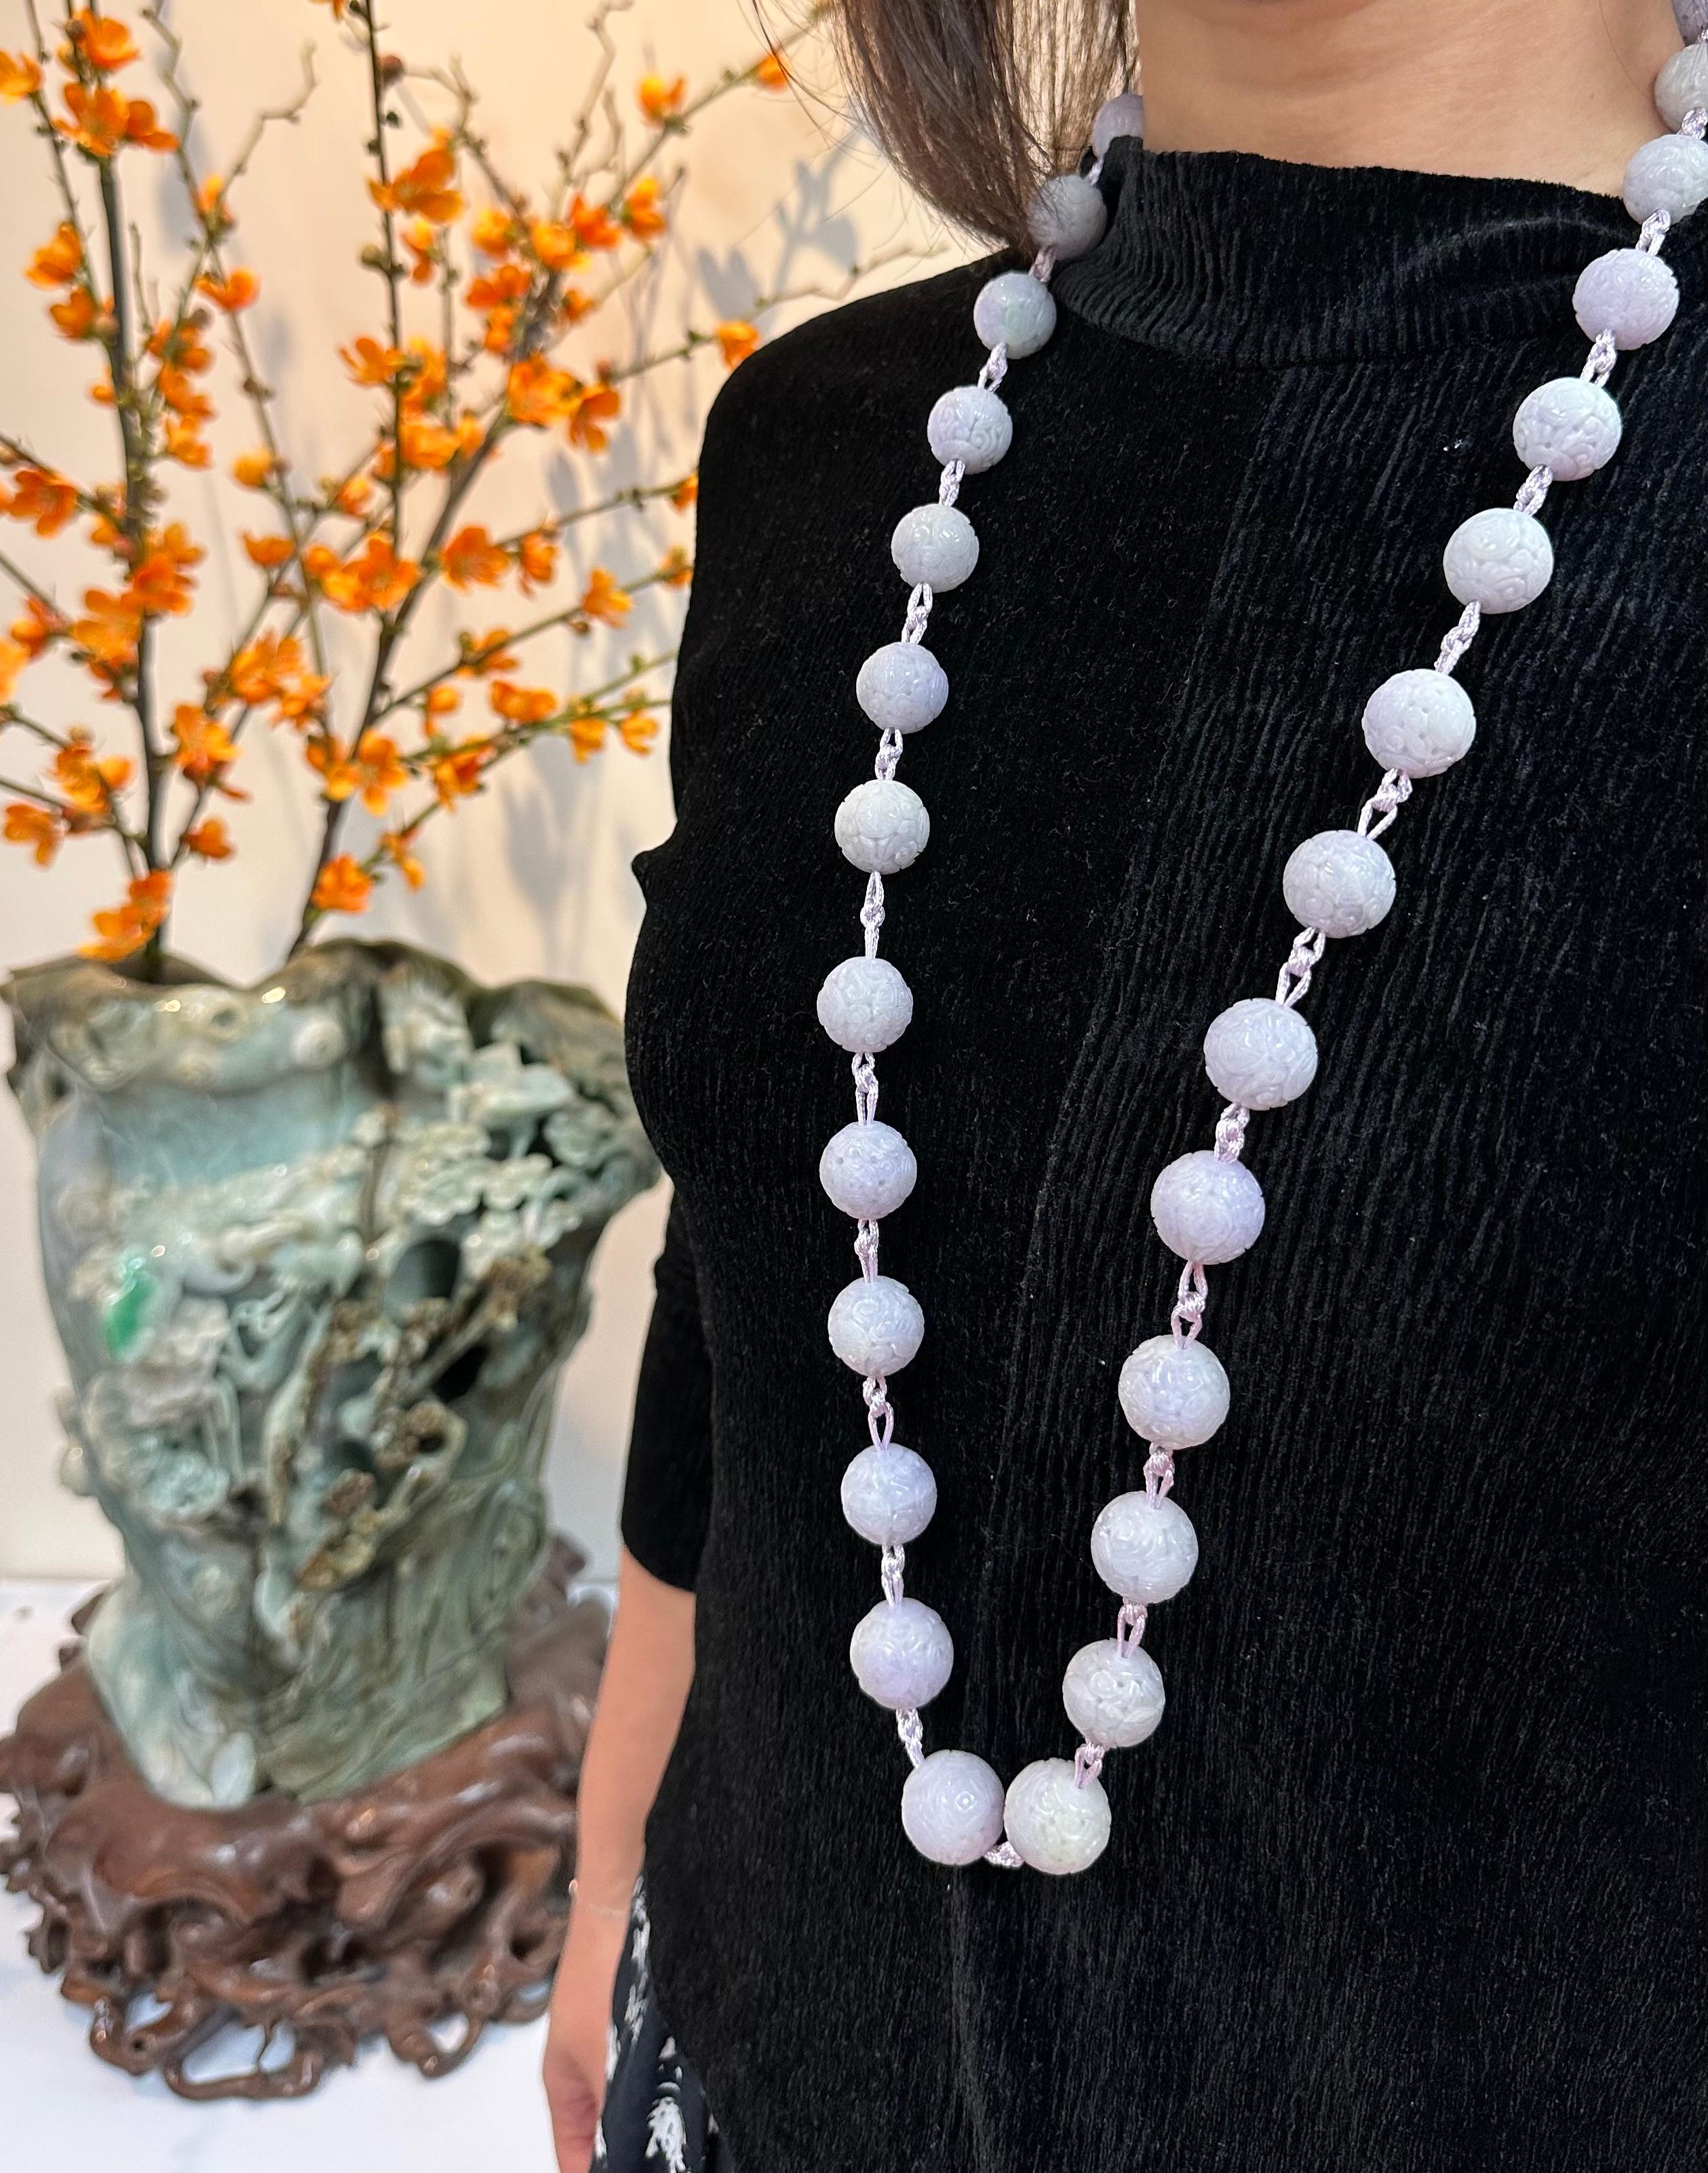 Please check out the HD video! For your consideration is a natural light lavender XXL carved jade bead necklace. Natural light Lavender and light green jade beads of this size are rare and not often seen. There are 31 jade beads ranging from around